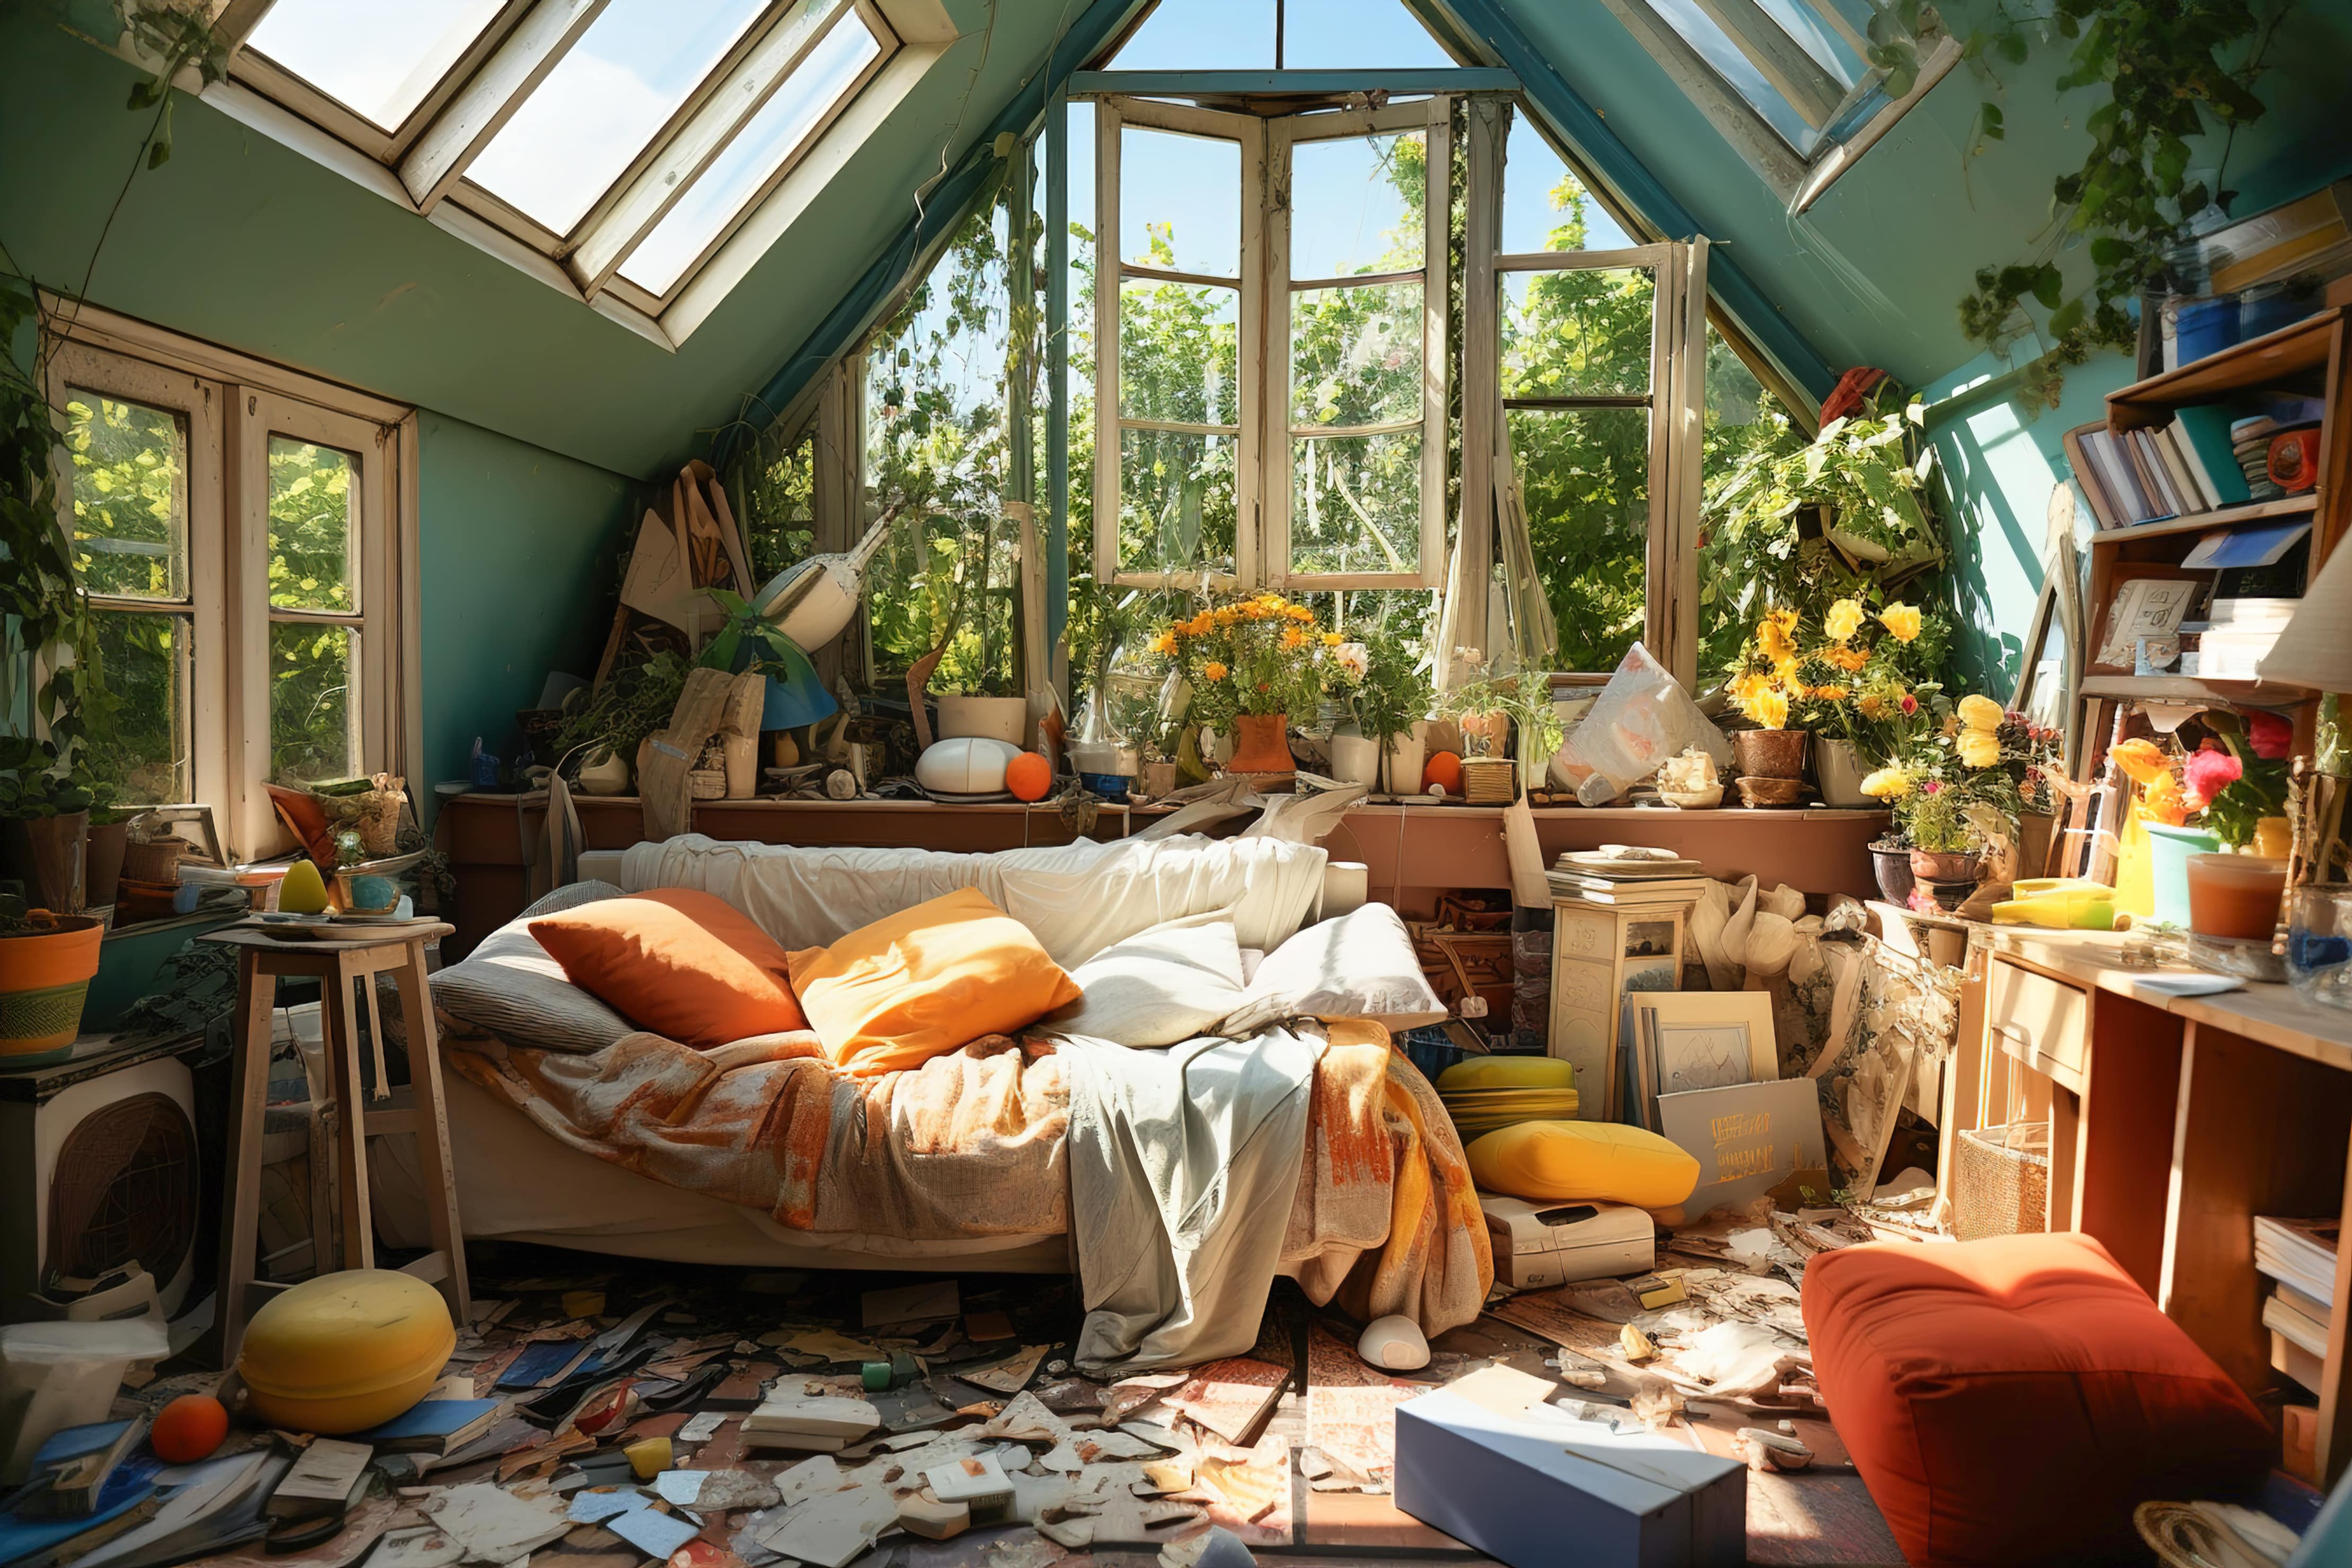 An AI generated image of a chaotic bedroom in need of decluttering and organising. There are papers and books all over the floor, piles of things everywhere and an air of  disorganisation.